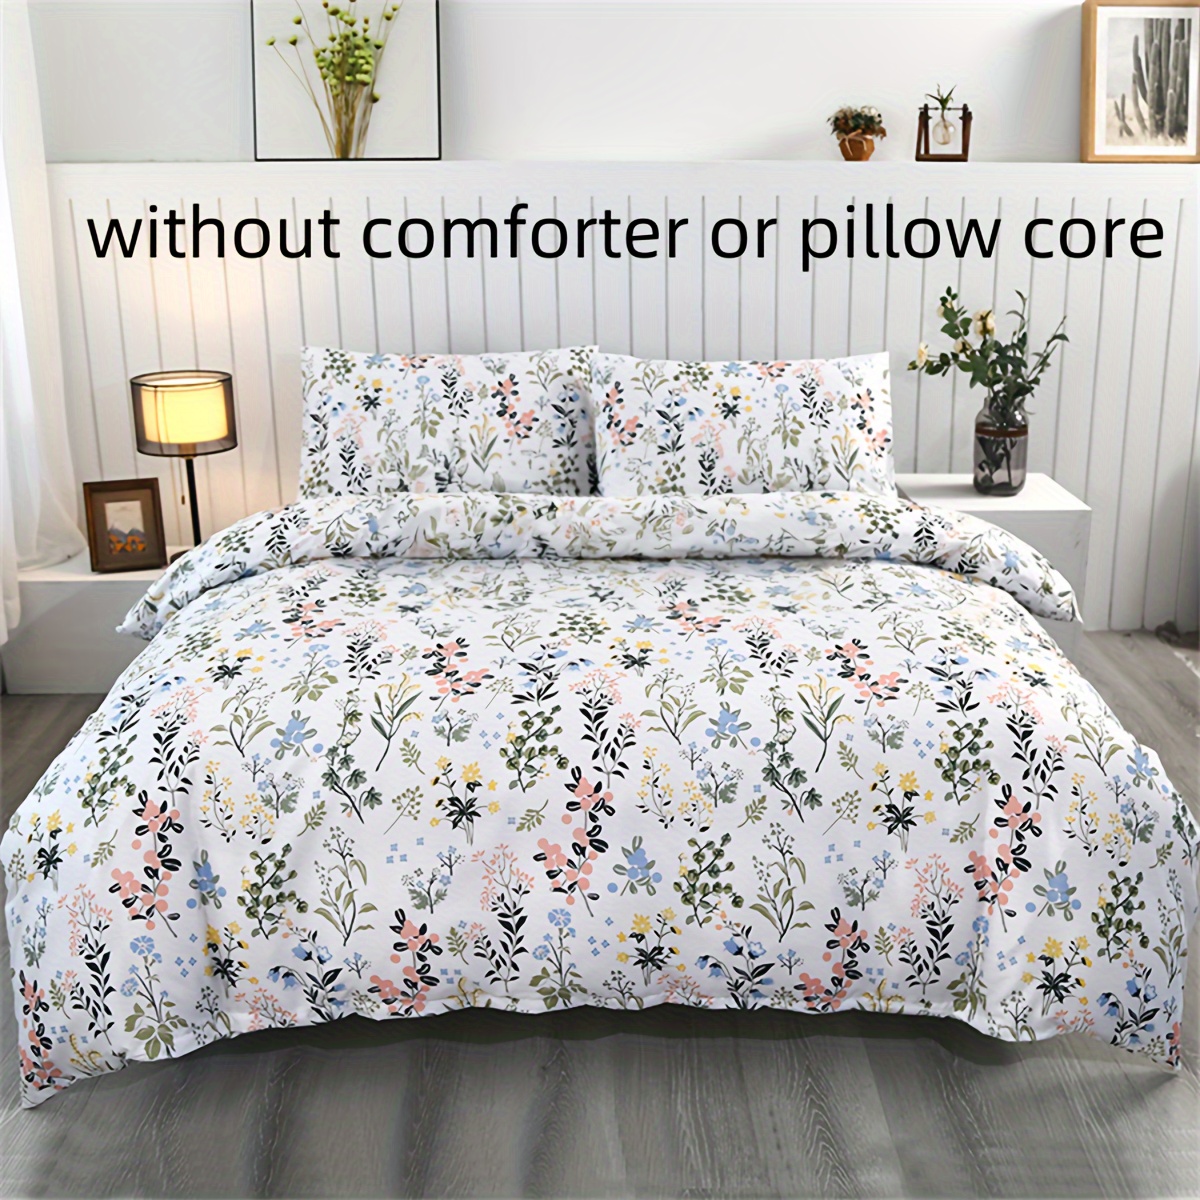 

3pcs Floral Duvet Cover Set, 100% Polyester, Soft Breathable Fabric, Contemporary Style, All-season Bedroom Comfort, Includes 1 Duvet Cover And 2 Pillowcases Without Core